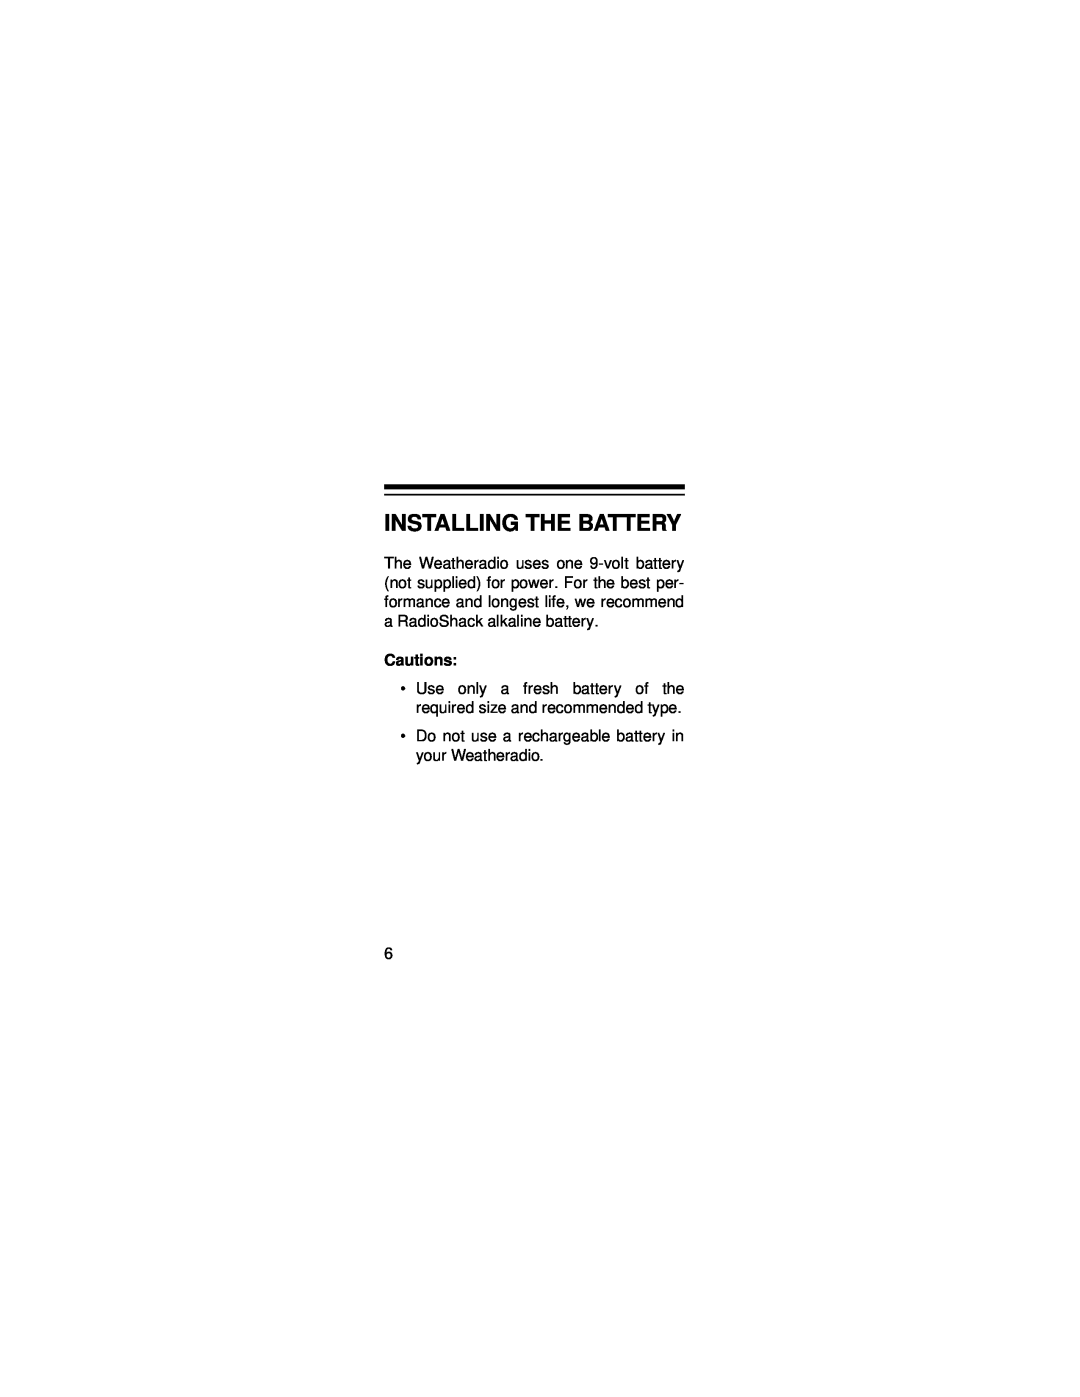 Radio Shack 12-239 owner manual Installing The Battery, Cautions 